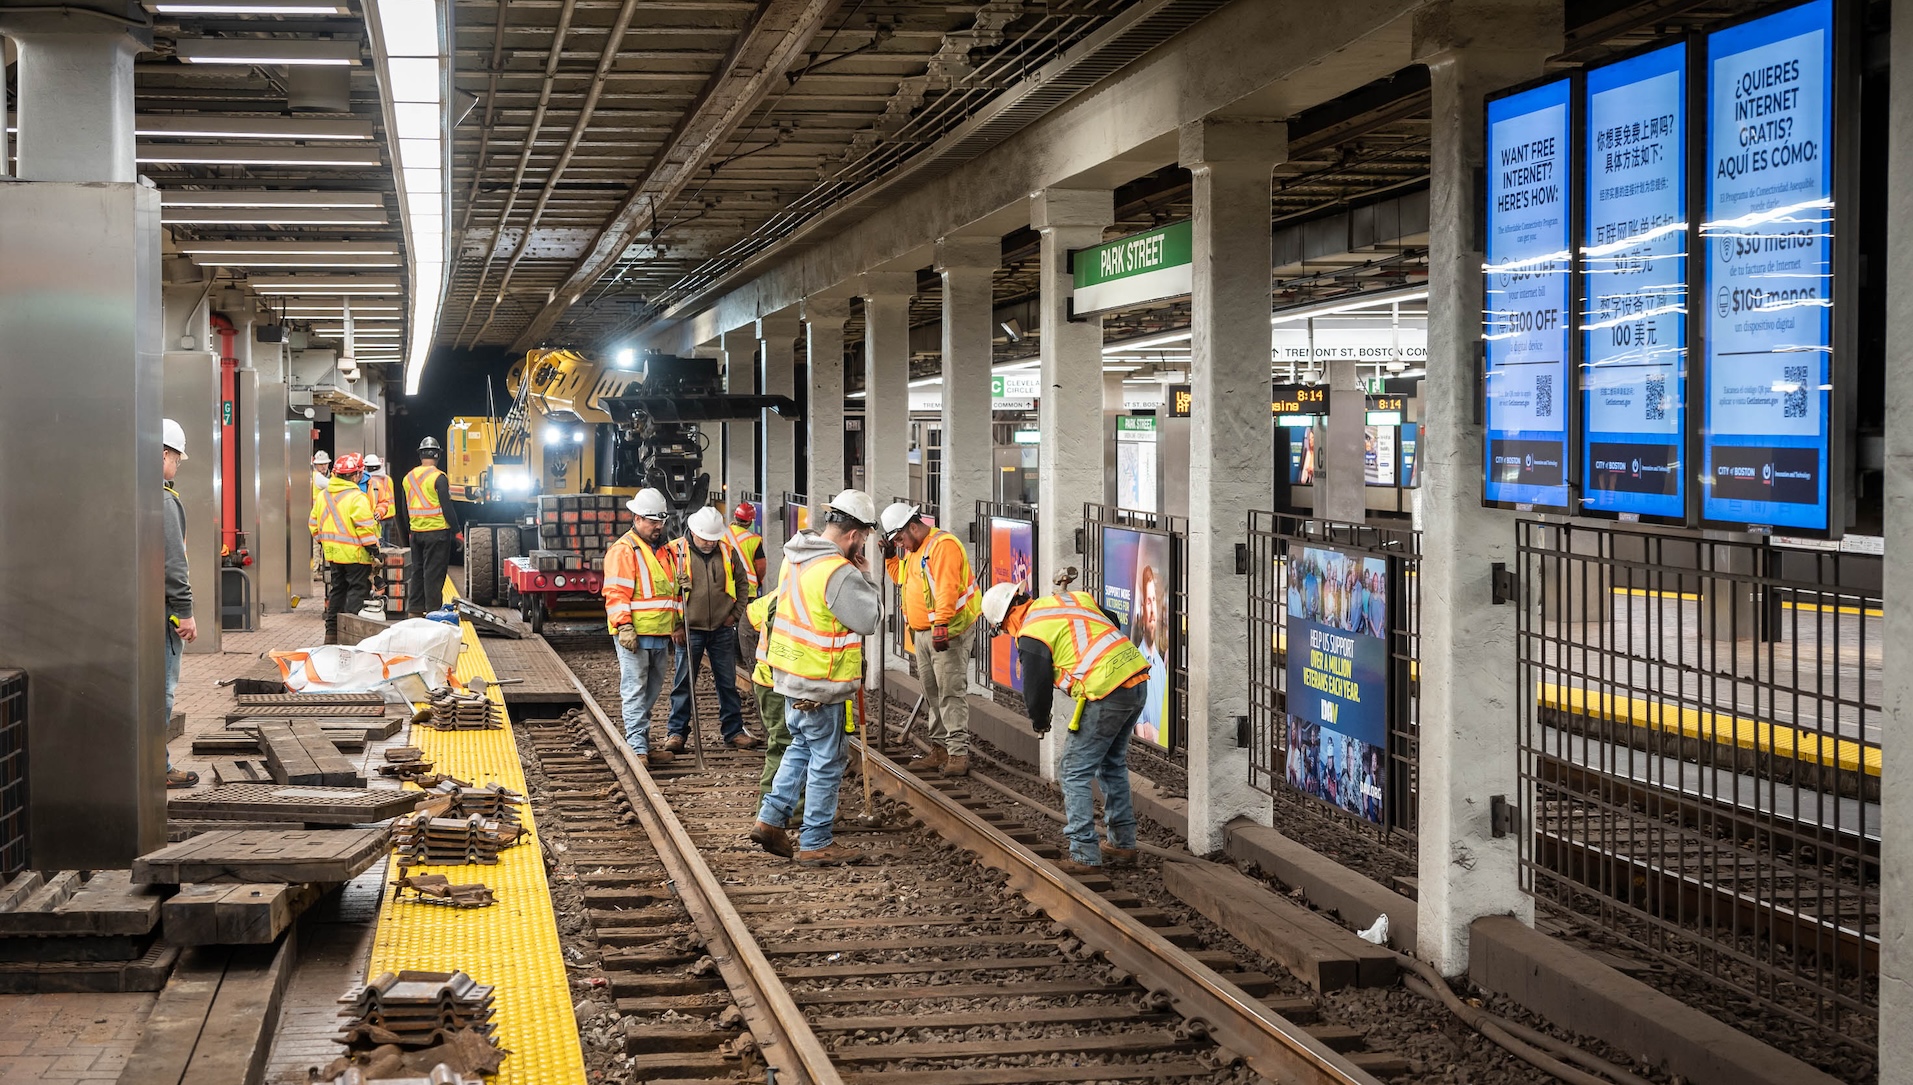 Workers in fluorescent yellow vests and helmets place tracks inside a subway station below a green "Park Street" sign. The platform of the station is covered in railroad ties and plates and other construction materials. In the distance a yellow lull forklift is on the tracks at the edge of the station.